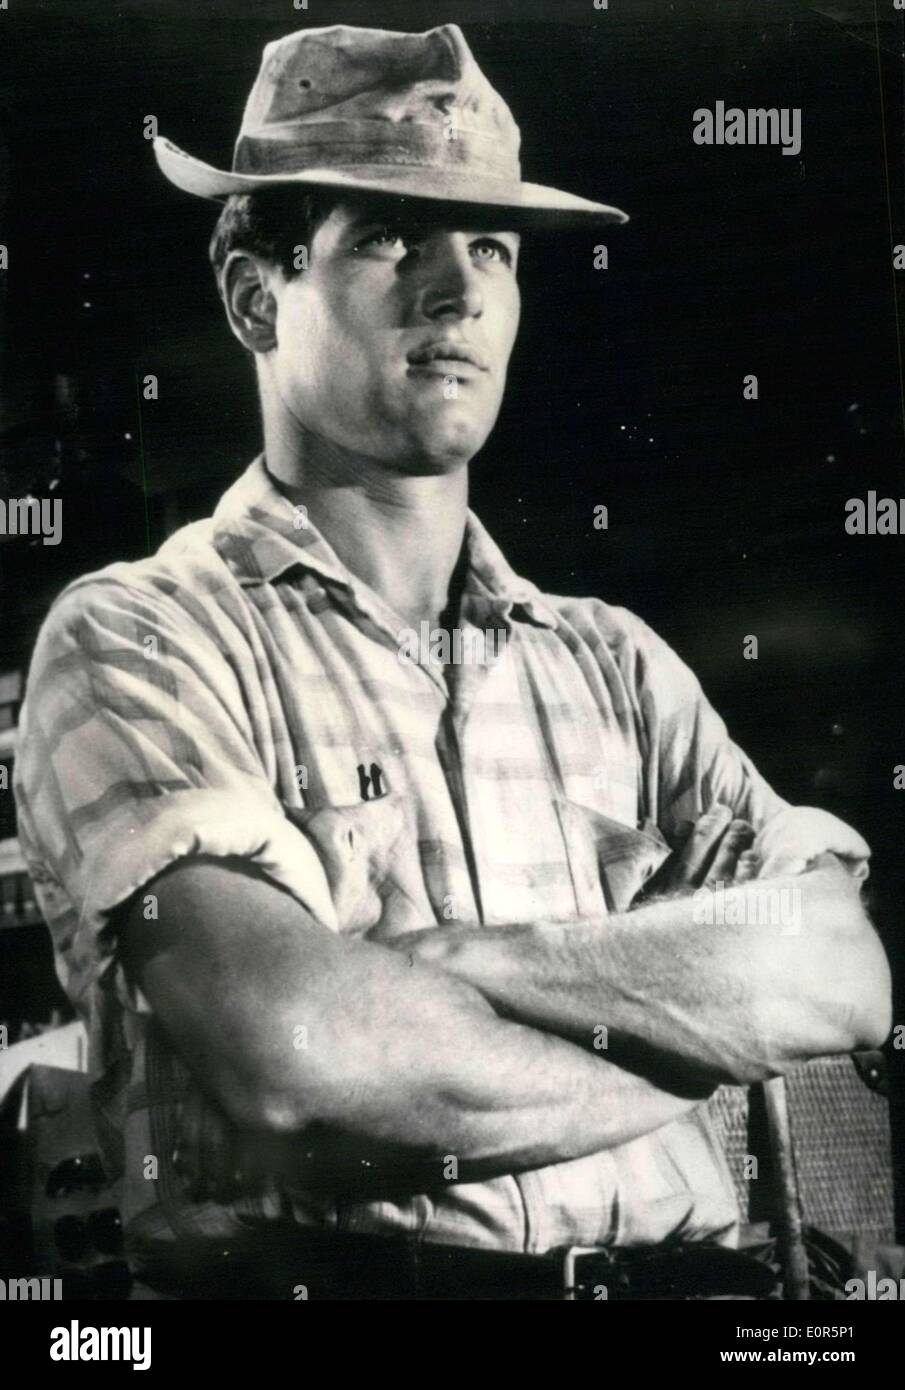 May 19, 1958 - American actor Paul Newman won the ''Best Male Actor'' Award at the Cannes Film Festival for his role in ''The Fires of Summer''. Here is a picture of Paul Newman from the movie. Stock Photo